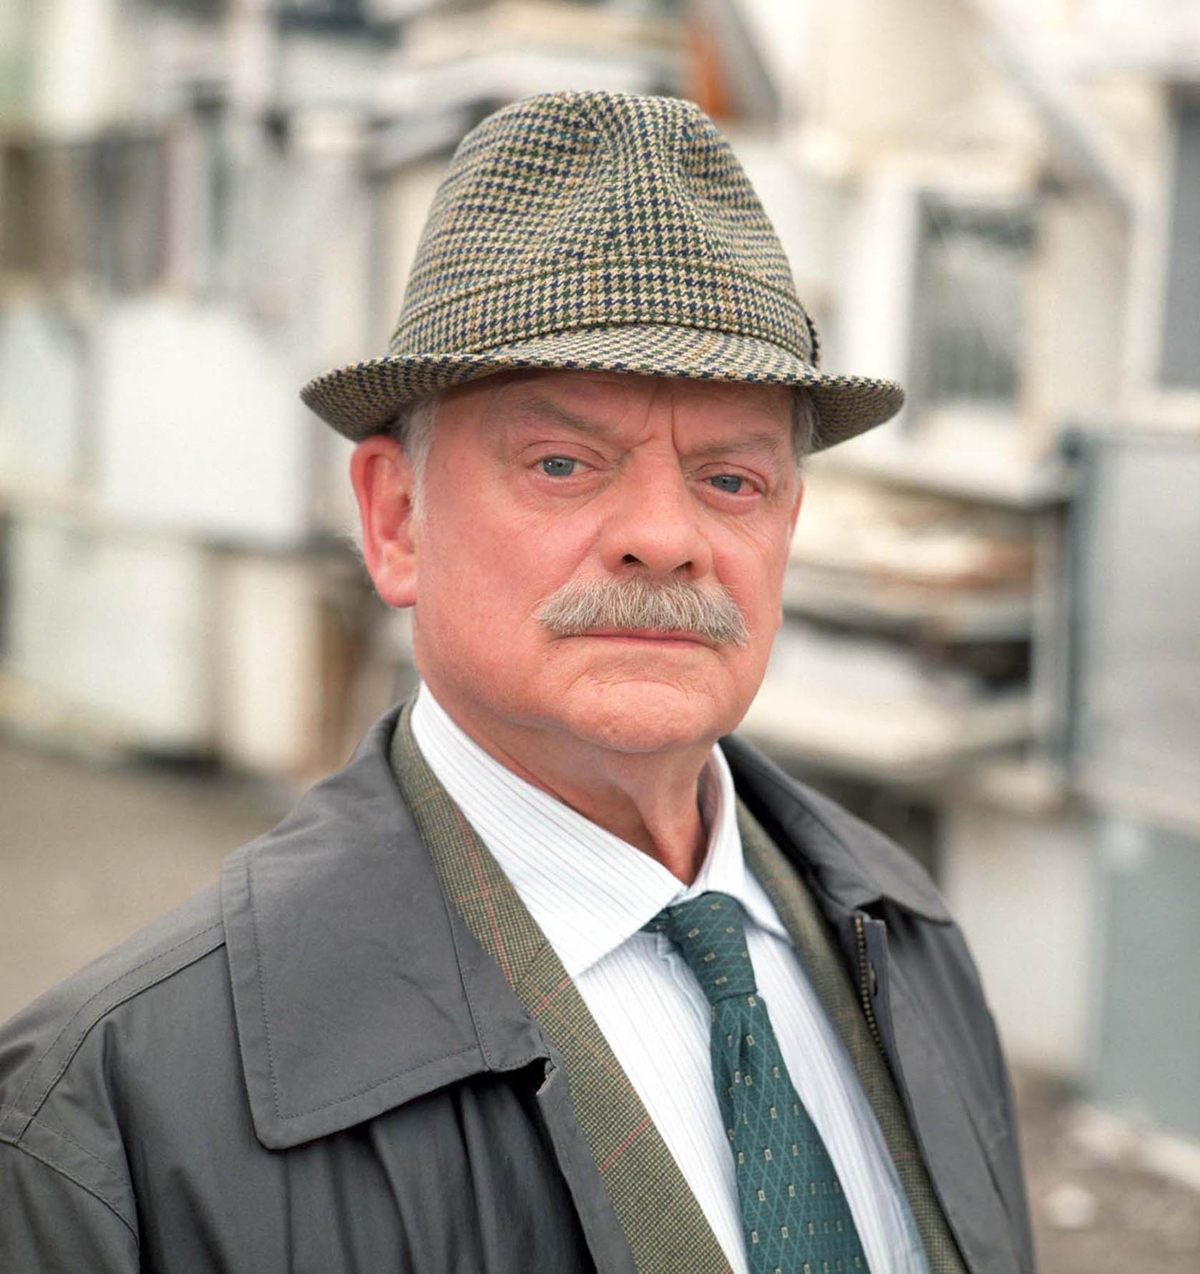 Sir David Jason as Detective Jack Frost in A Touch of Frost